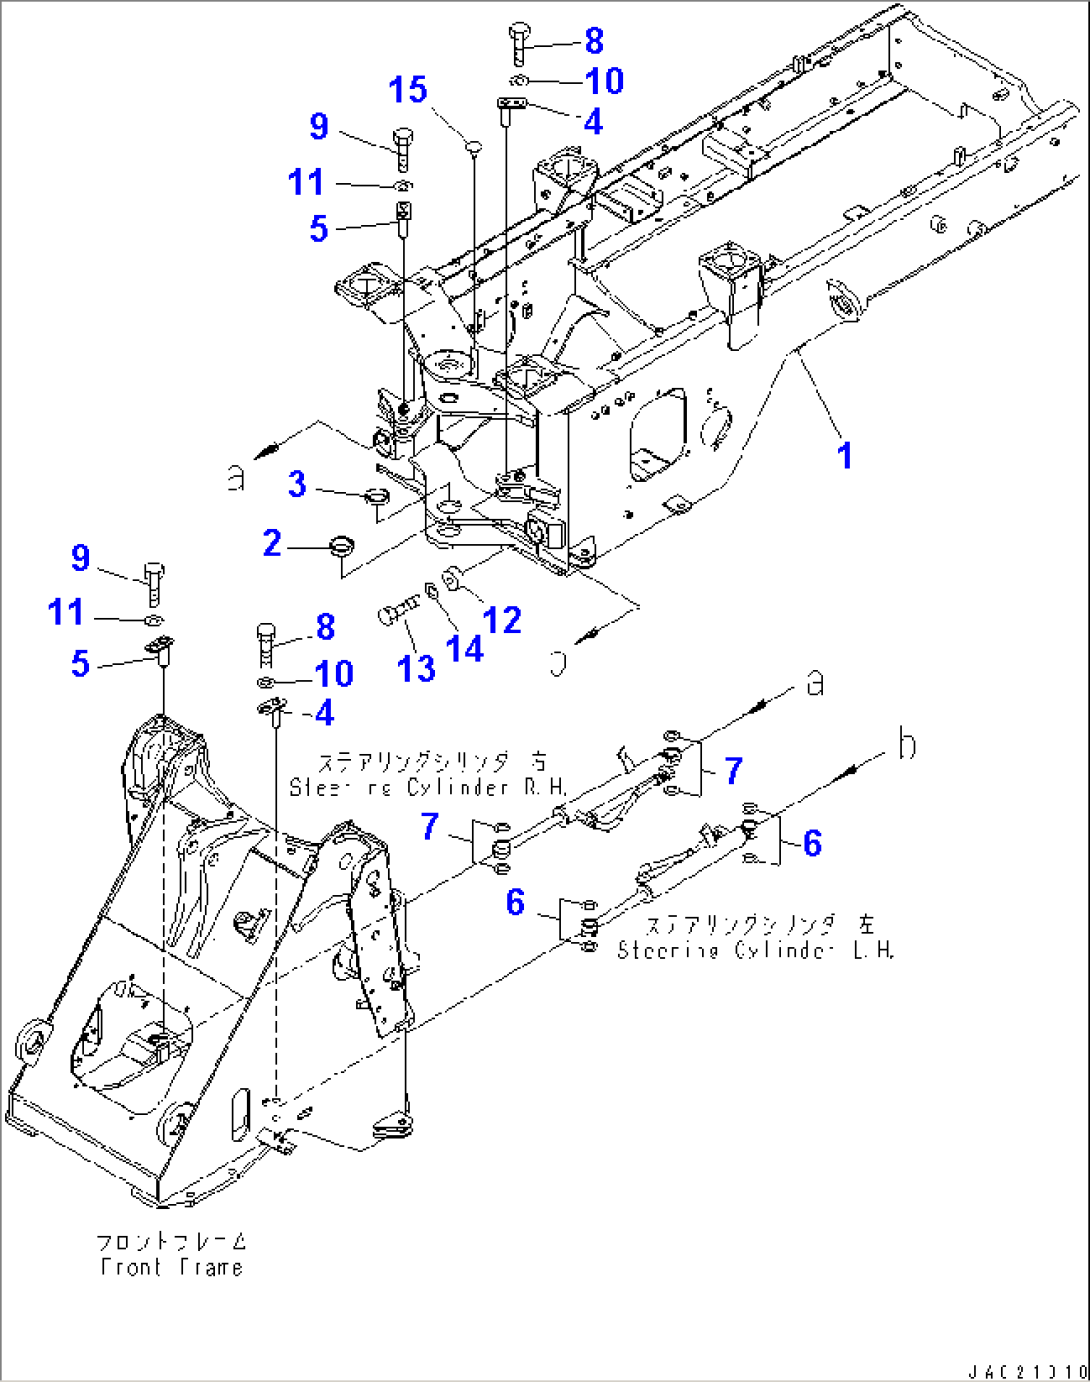 REAR FRAME (FOR ADDITIONAL COUNTERWEIGHT AND BATTERY DISCONNECT SWITCH)